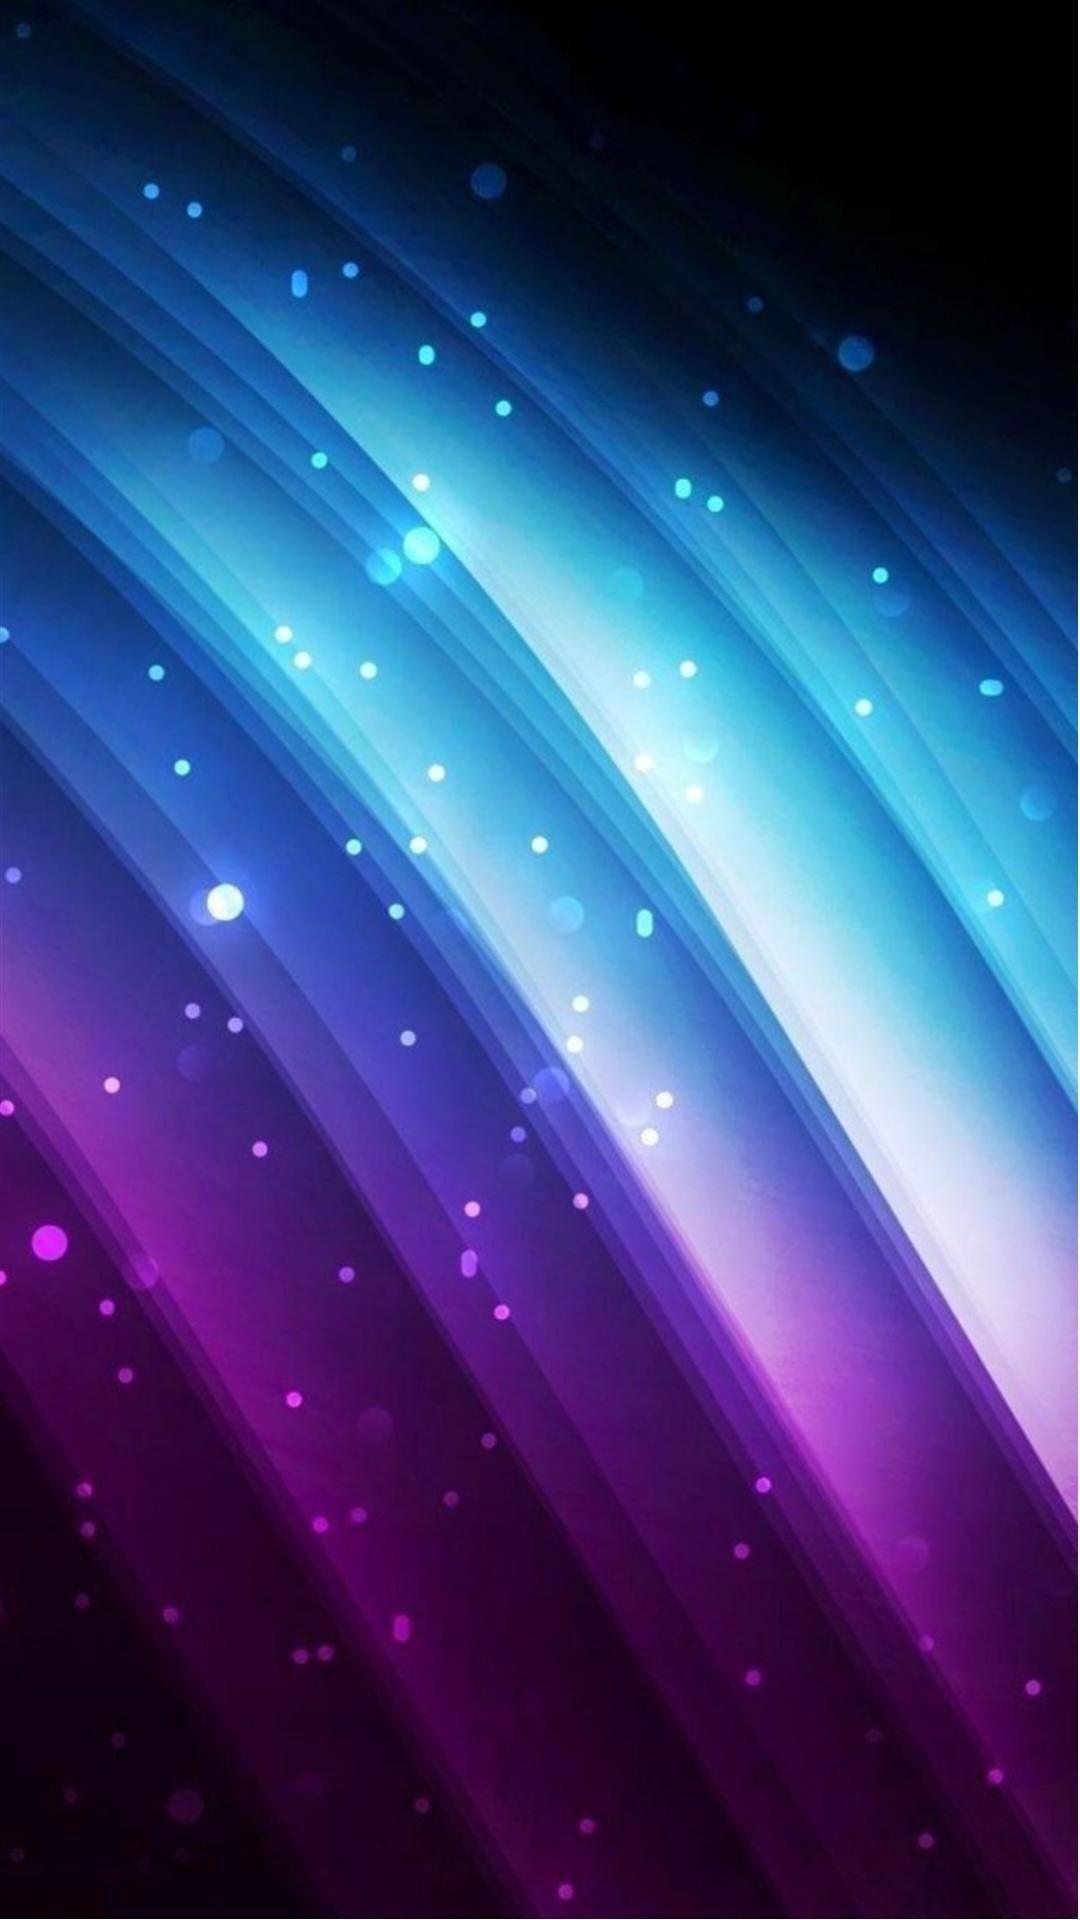 wallpaper hd for mobile nokia